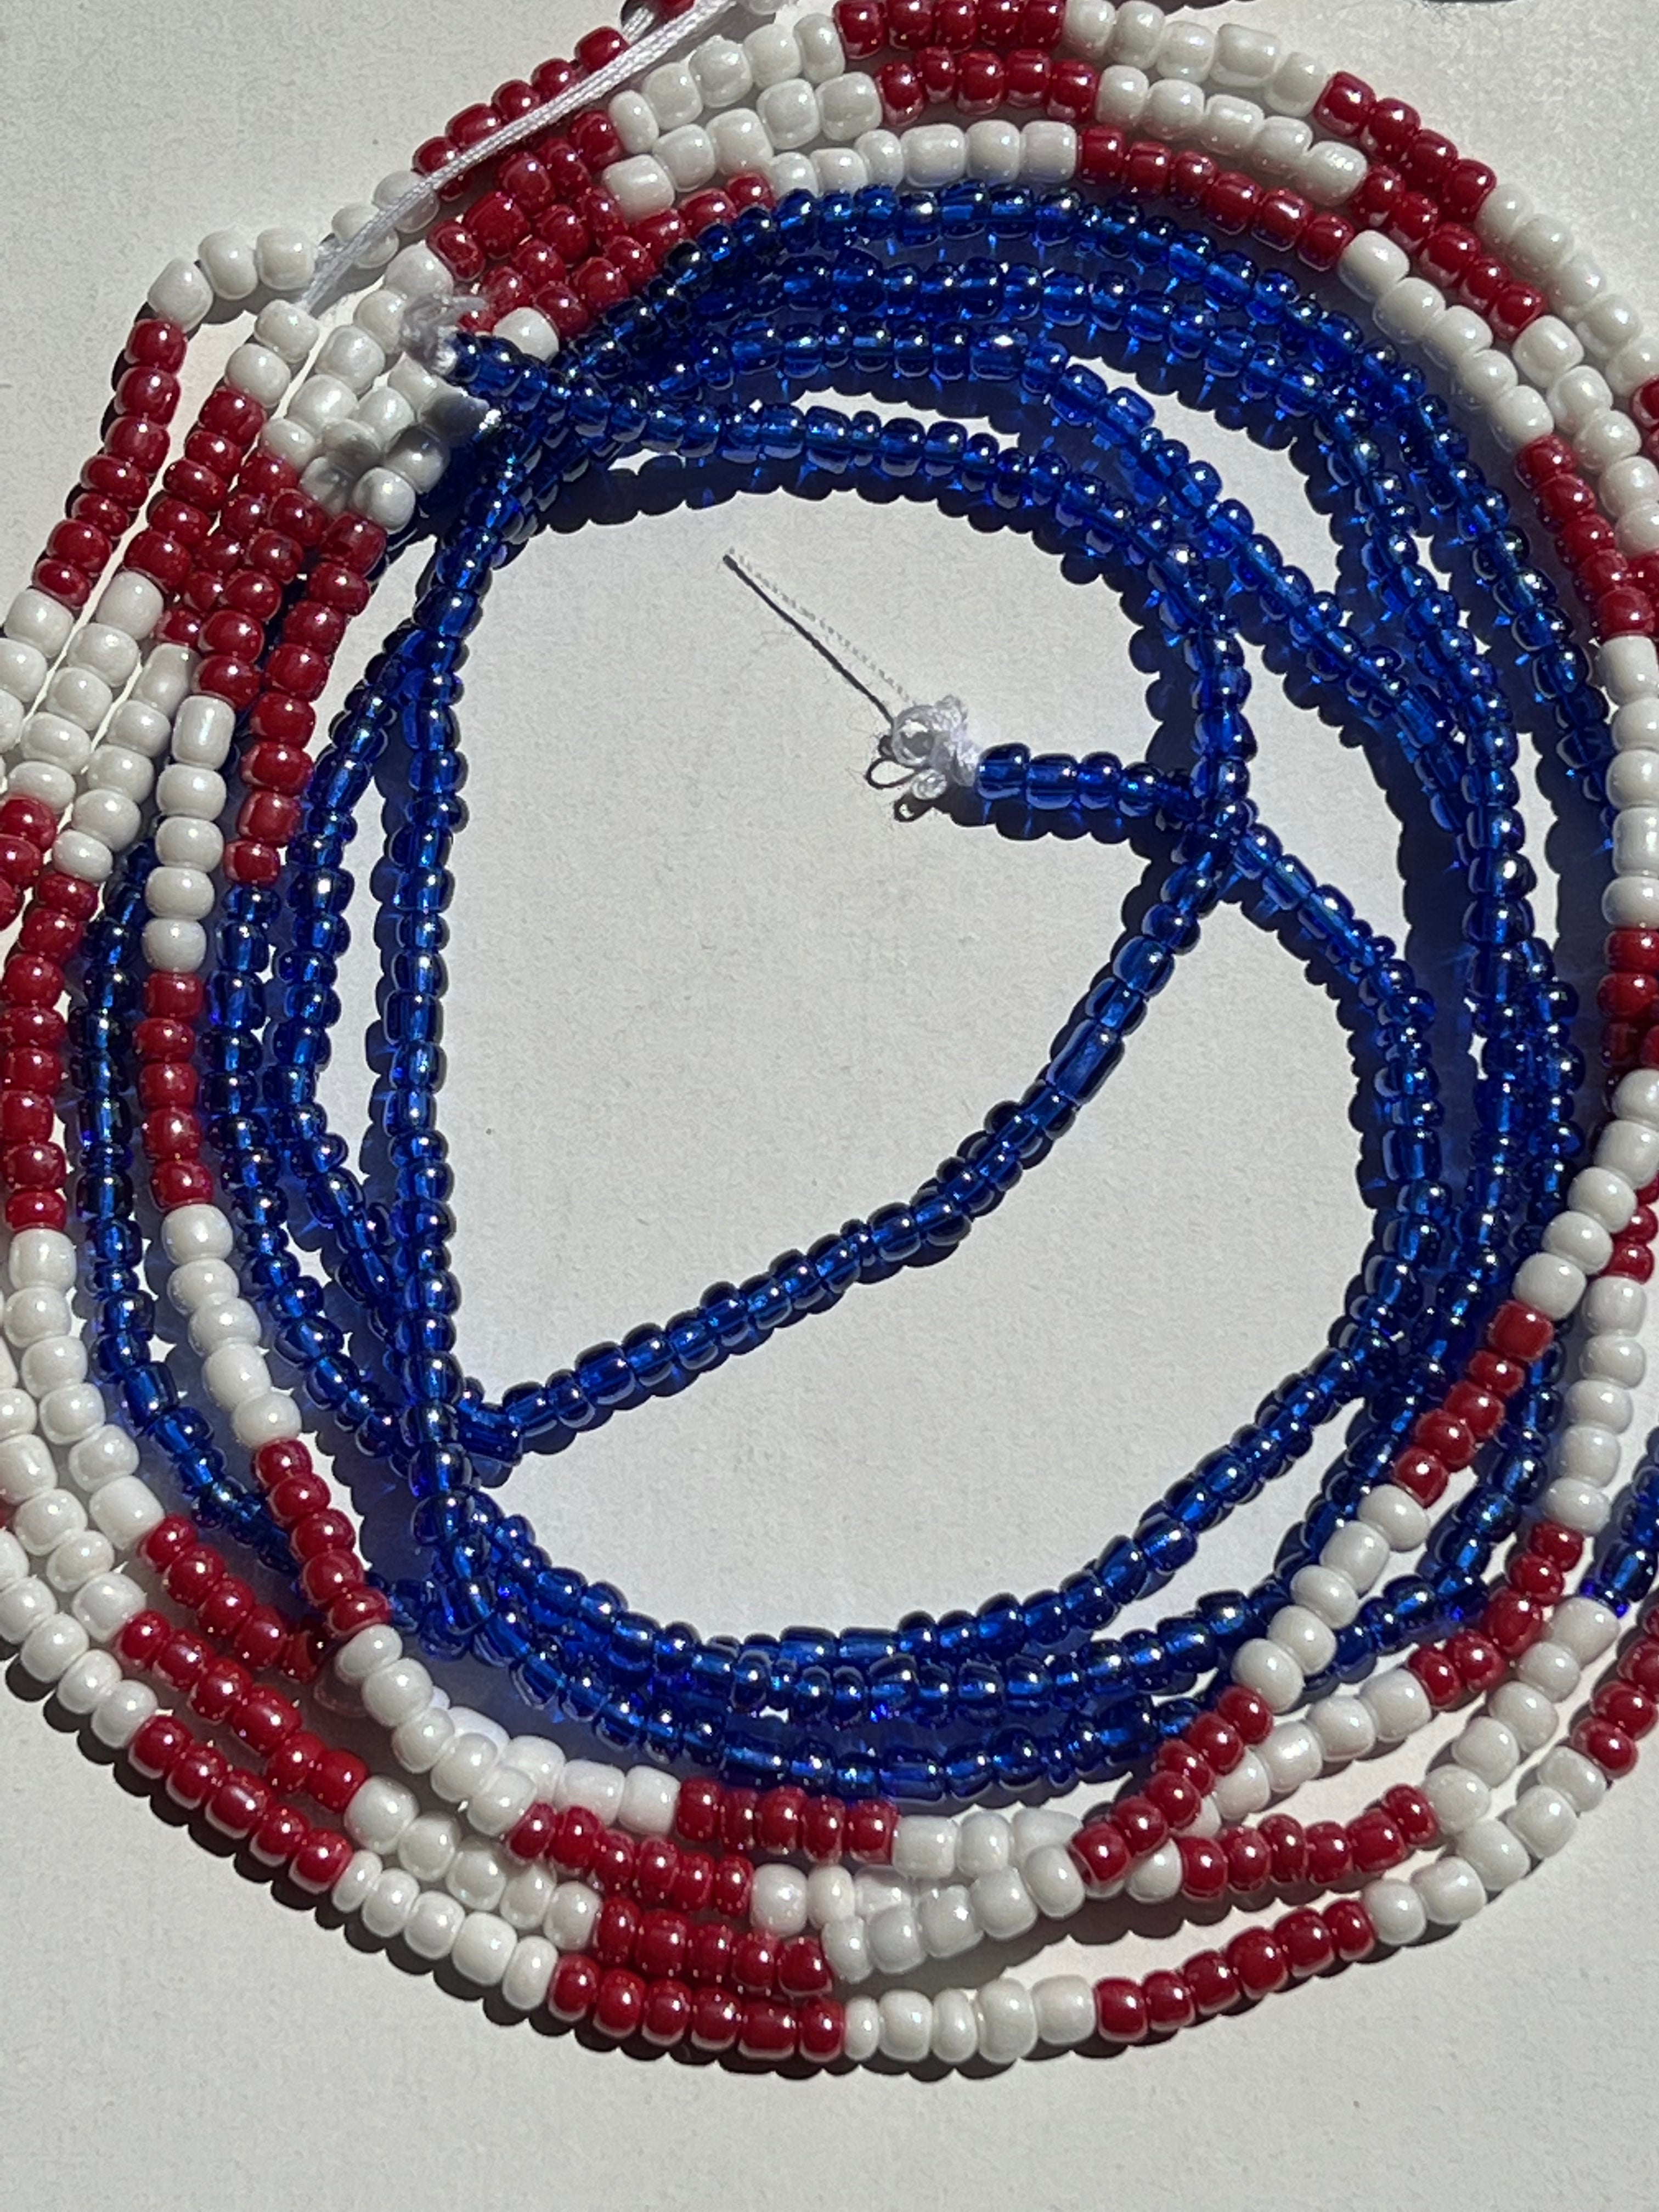 4th of July waist beads - American Flag jewelry